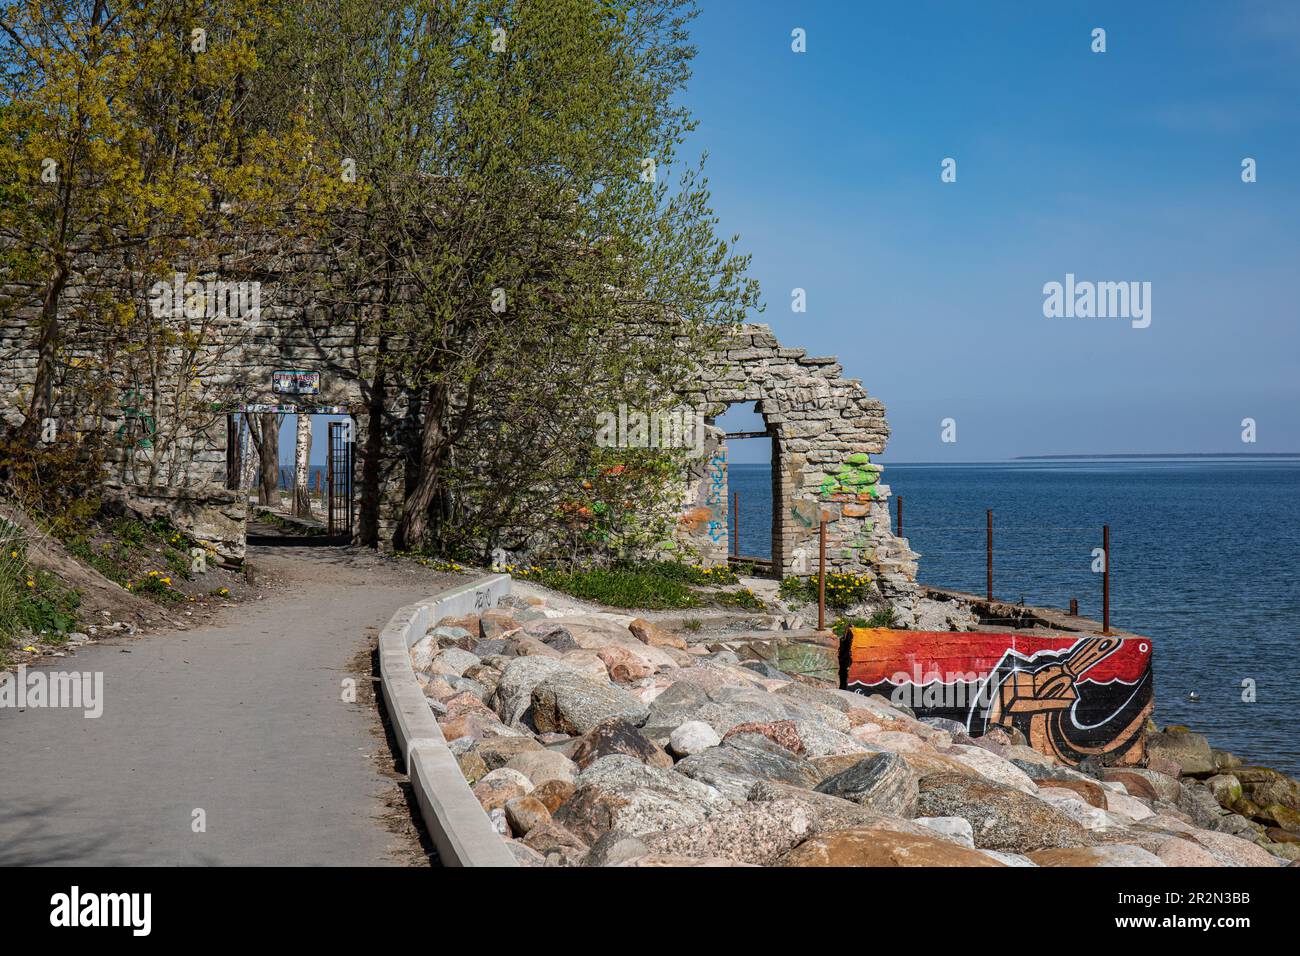 Patarei Sea Fortress, later a central prison, stone wall on a sunny spring day in waterfront Tallinn, Estonia Stock Photo